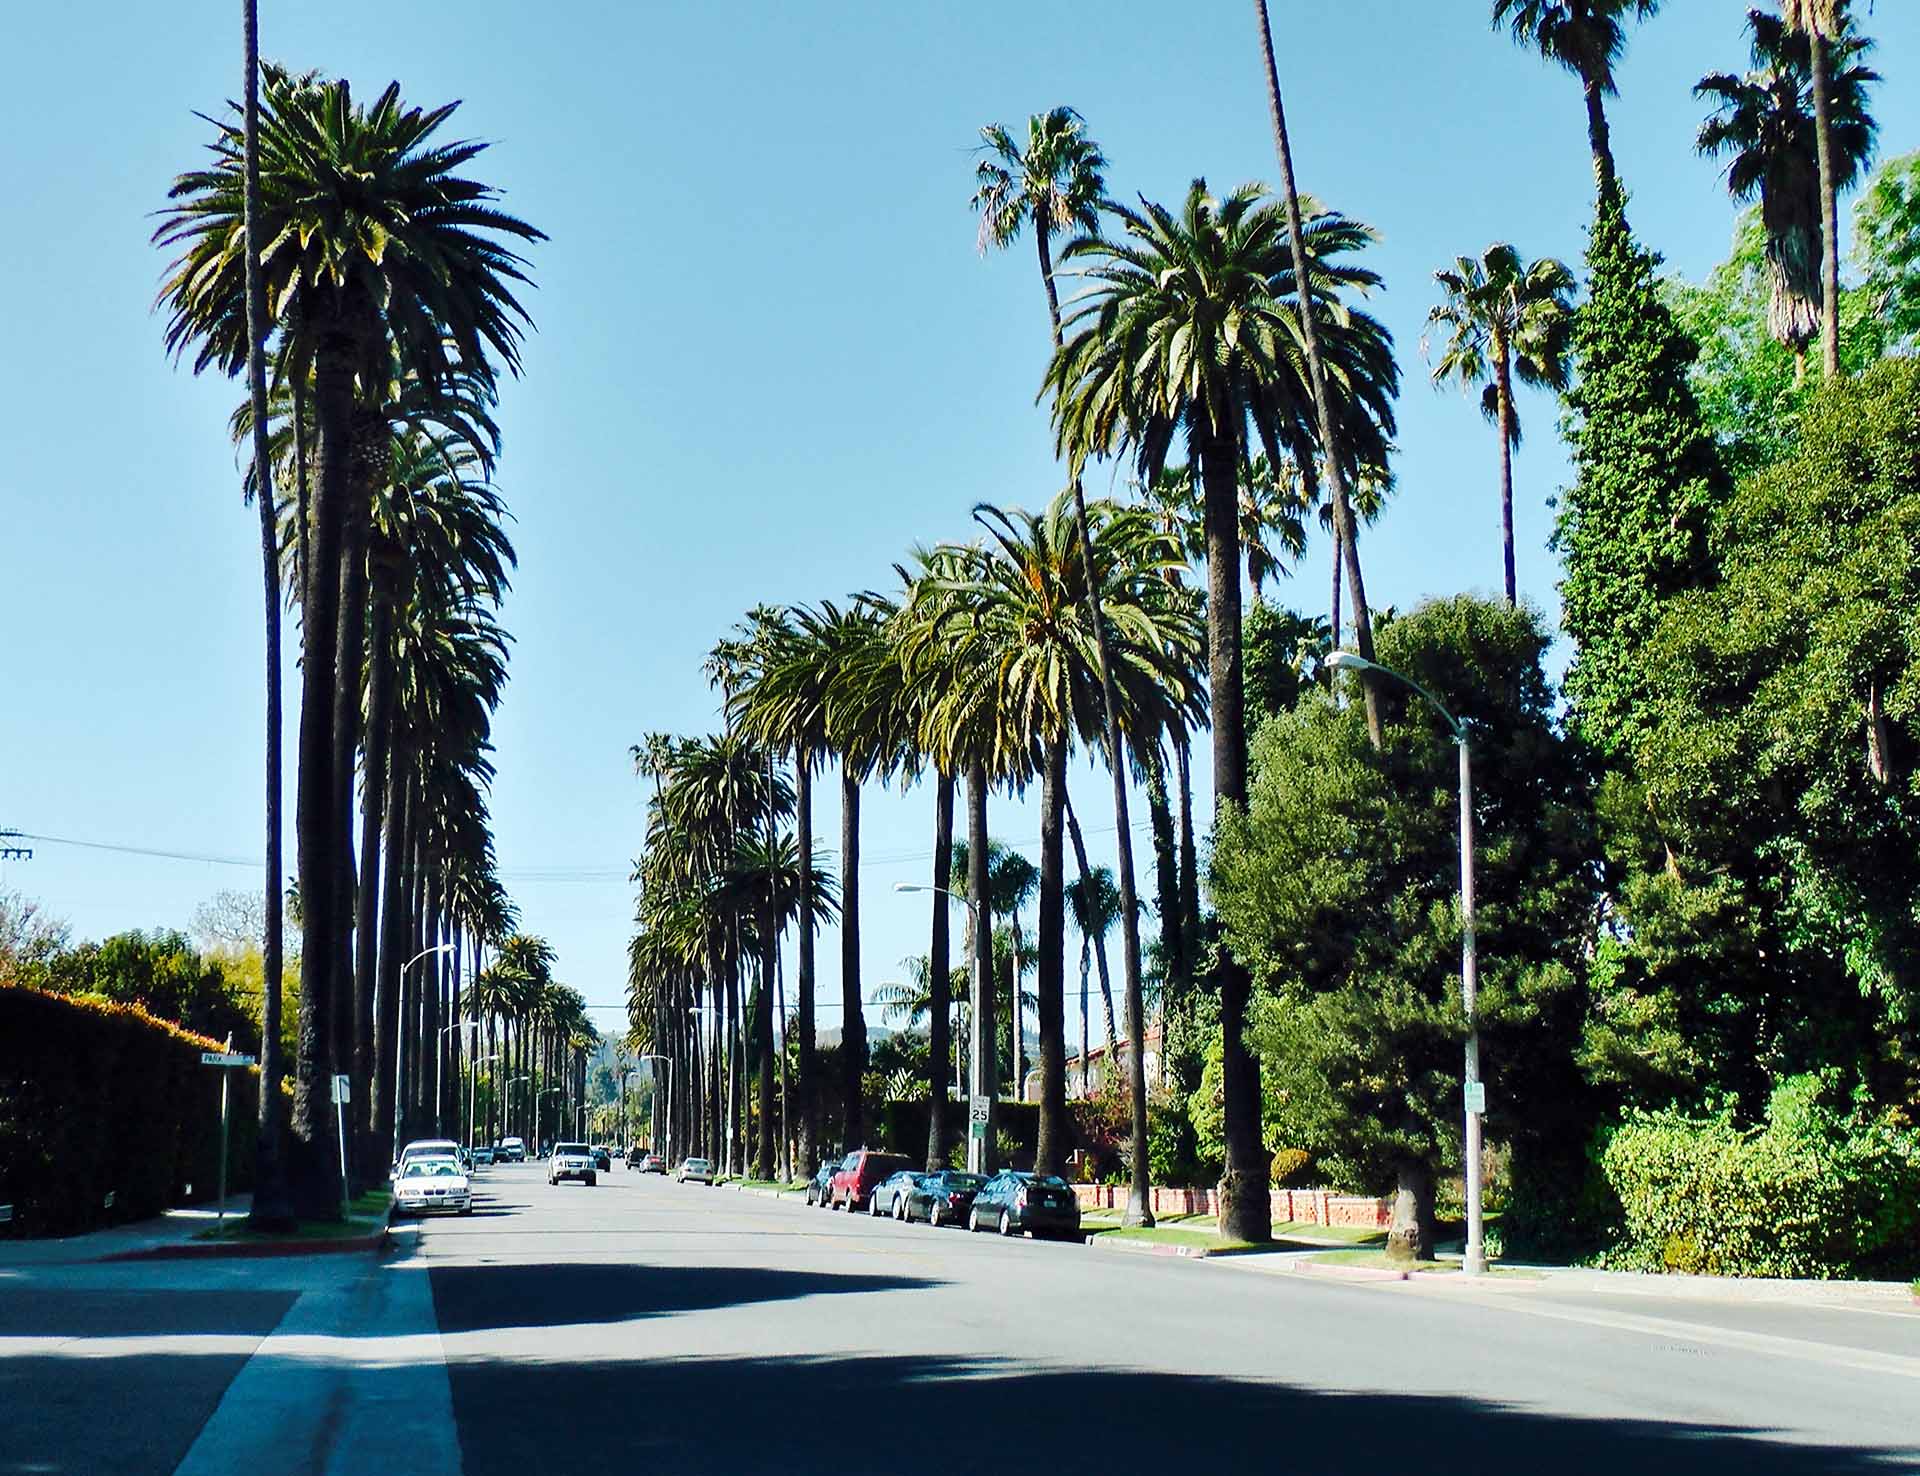 California street with palm trees